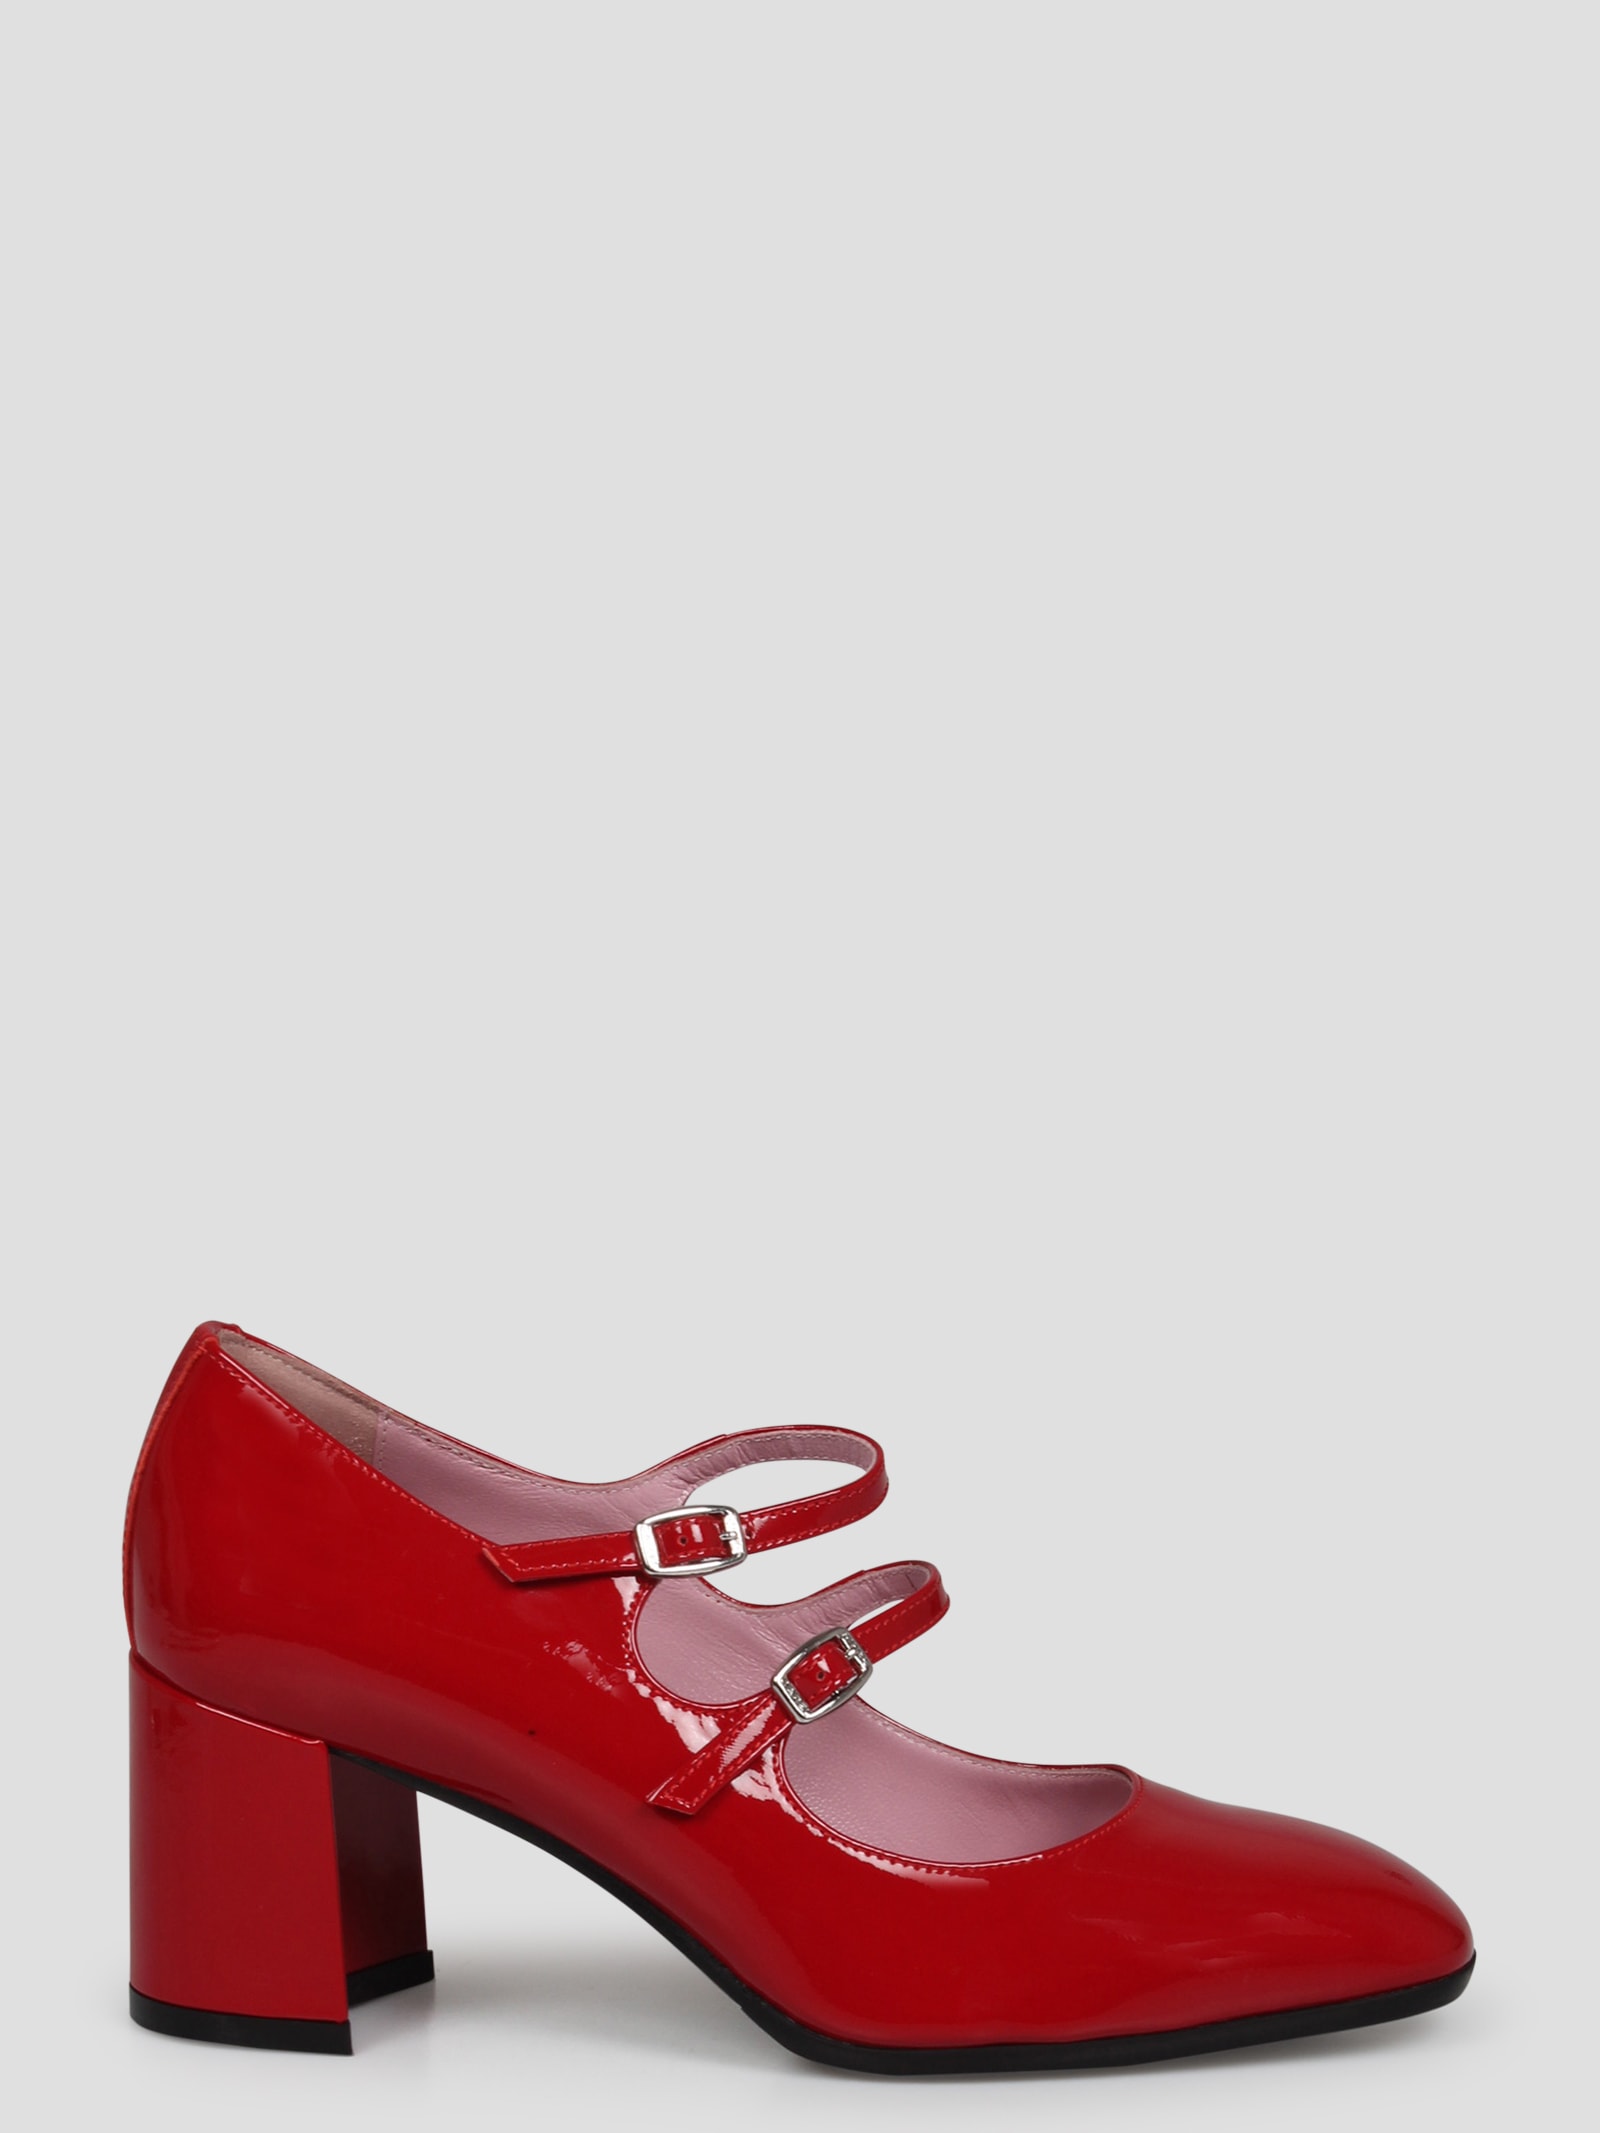 Carel Alice Mary Jane Pumps In Red